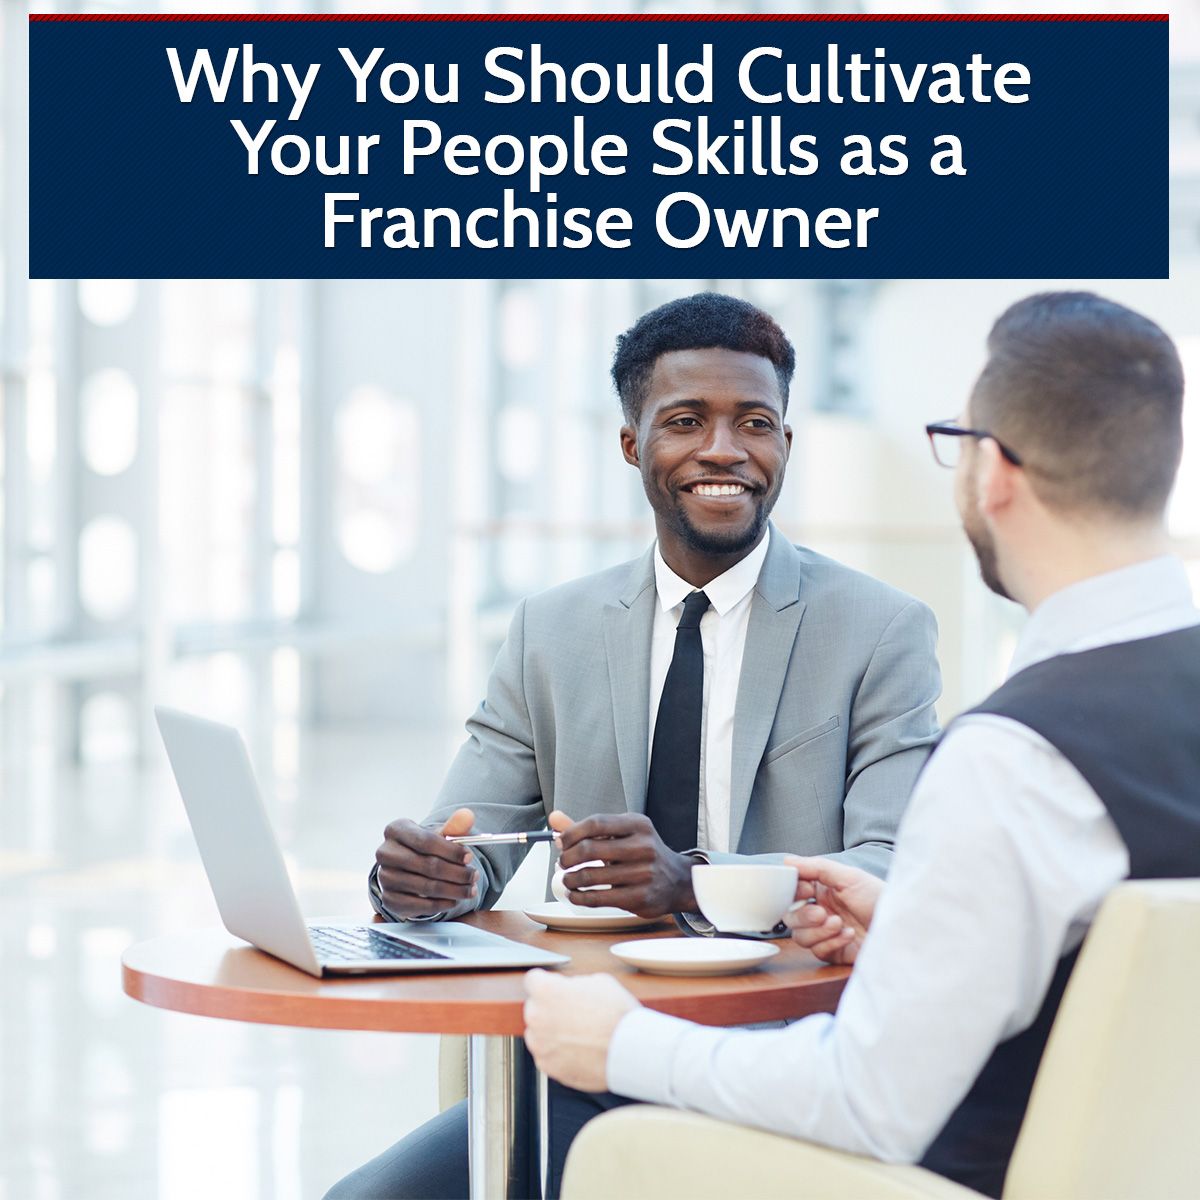 Why You Should Cultivate Your People Skills as a Franchise Owner